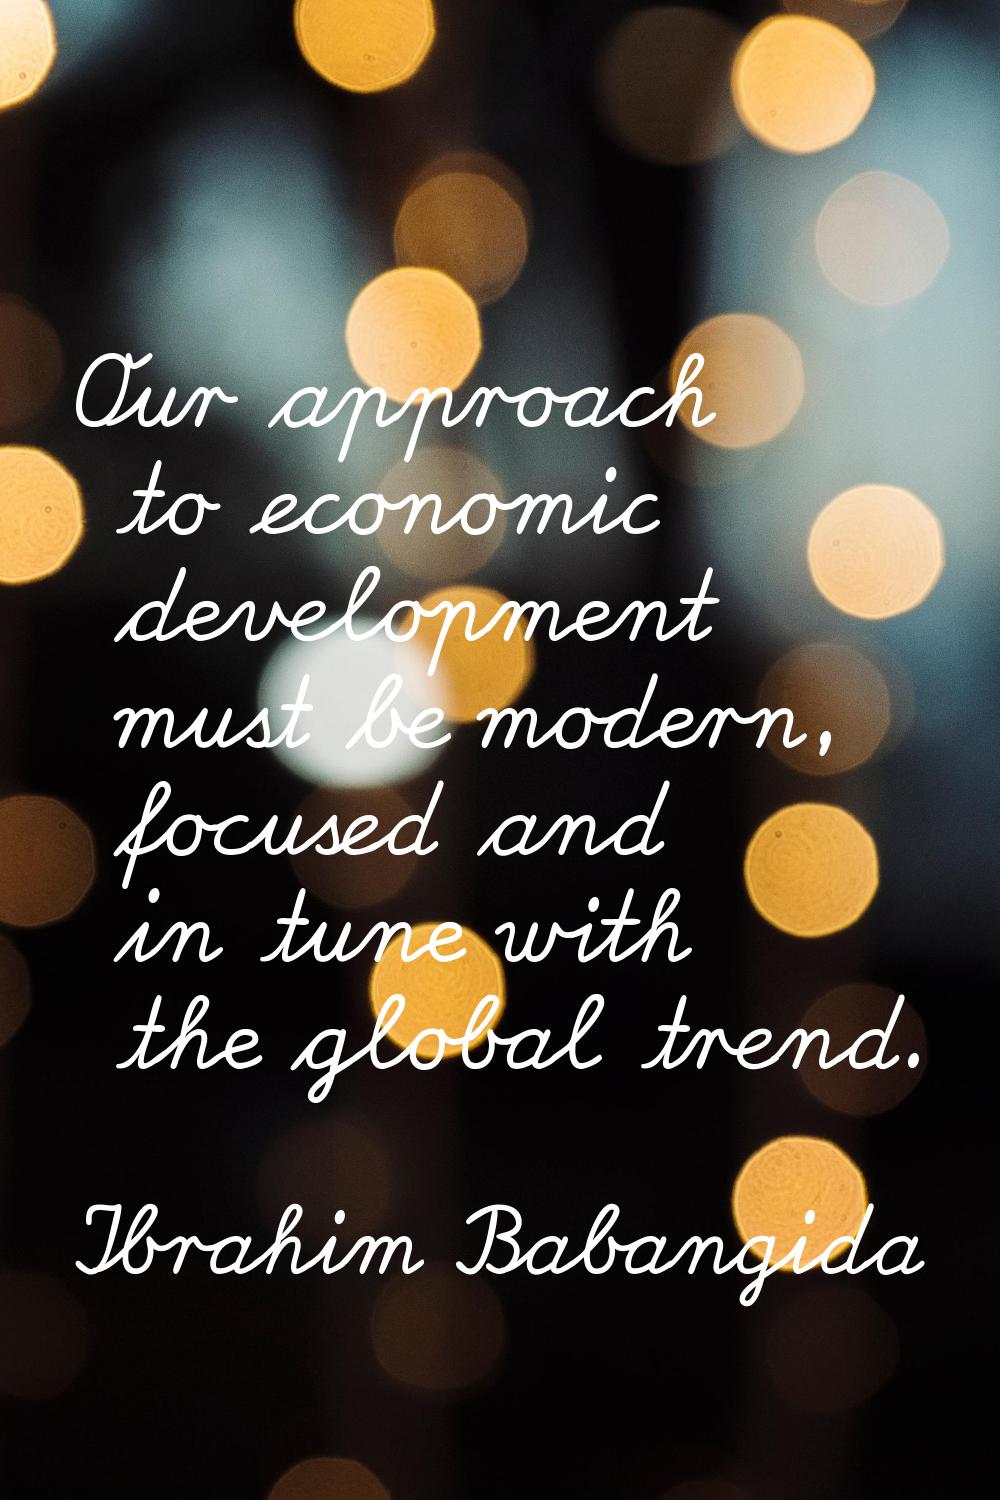 Our approach to economic development must be modern, focused and in tune with the global trend.